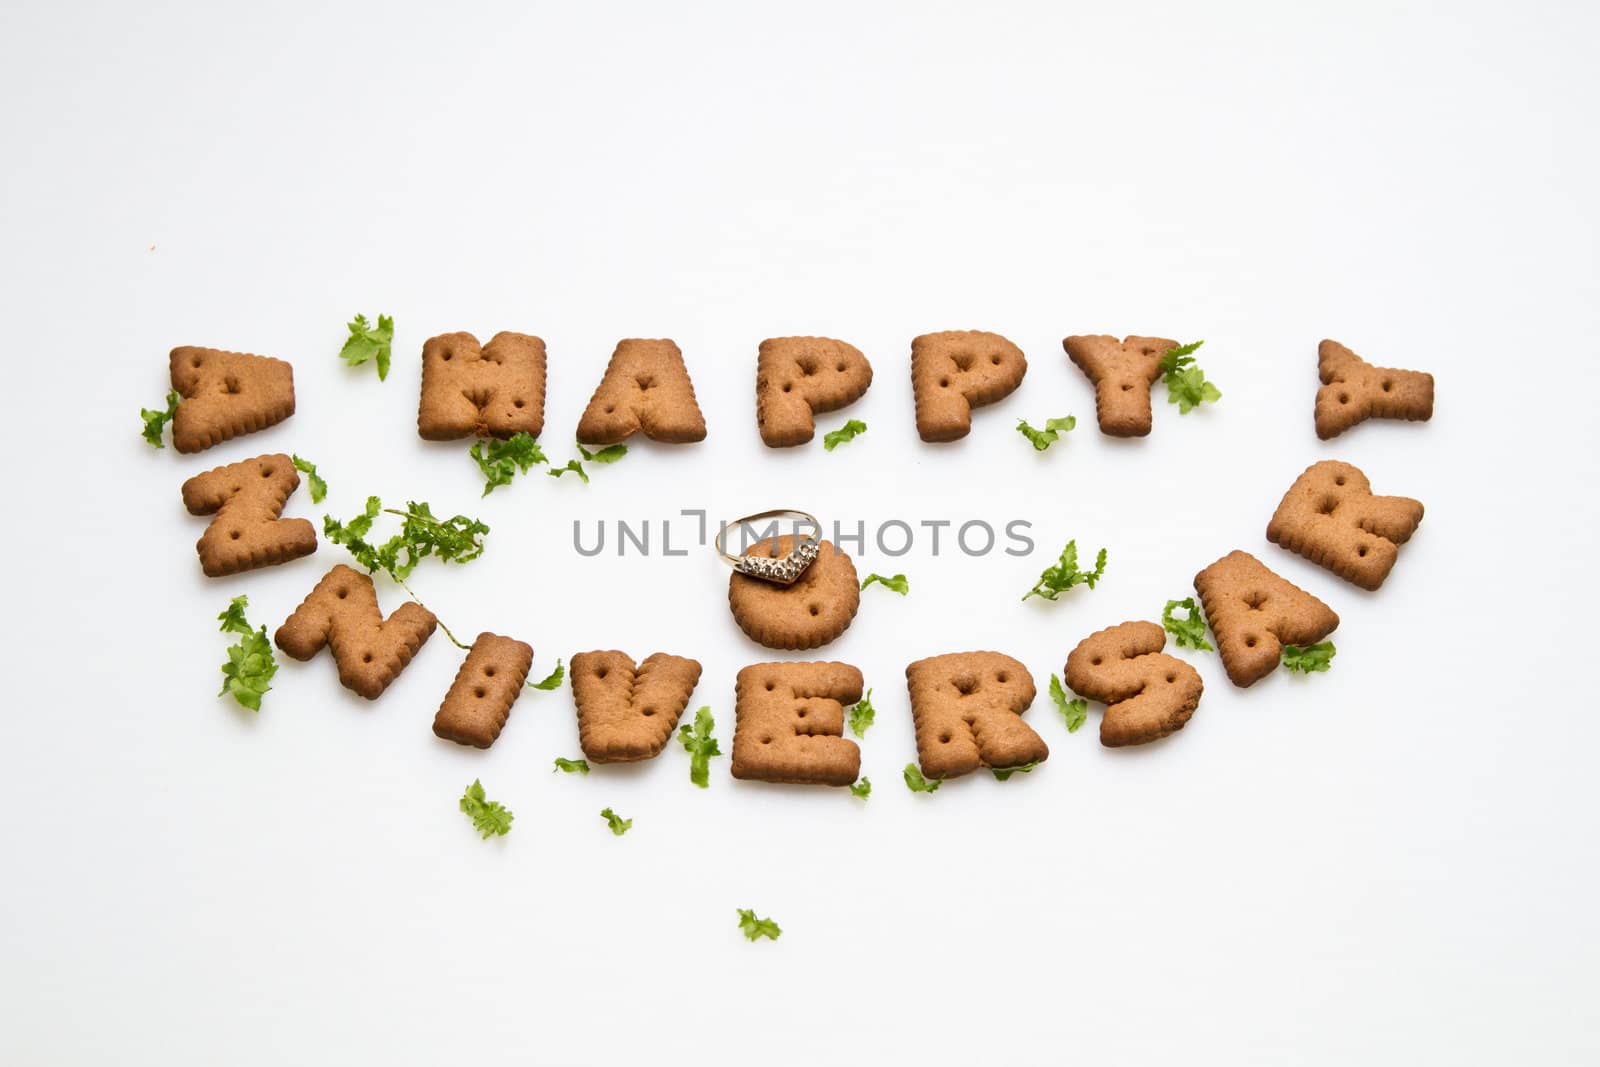 Happy anniversary wording by brown biscuits, ring and green leaves on white surface